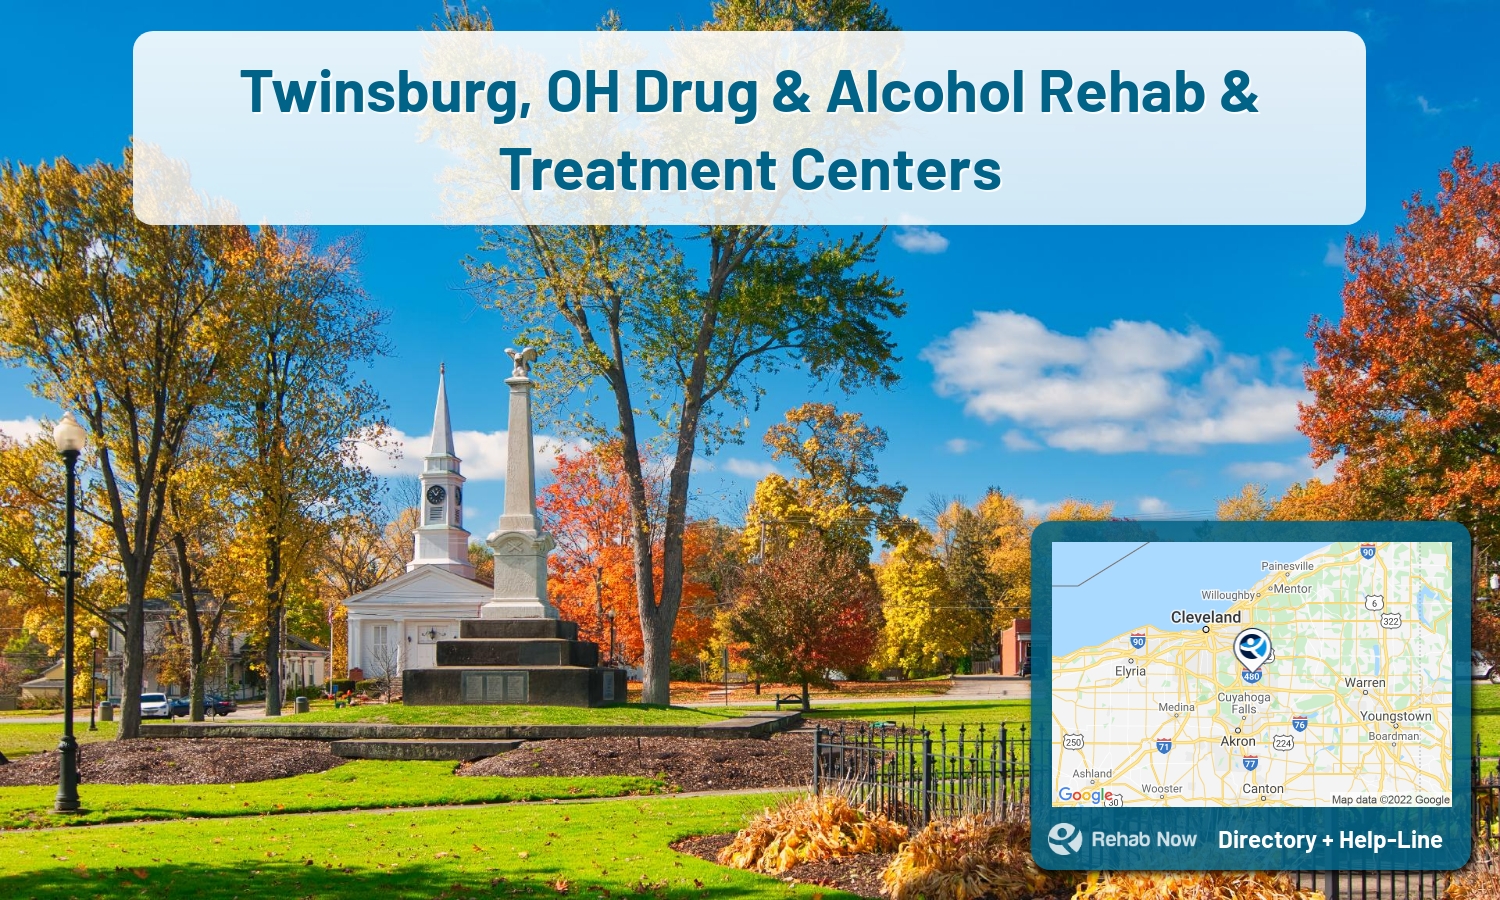 View options, availability, treatment methods, and more, for drug rehab and alcohol treatment in Twinsburg, Ohio